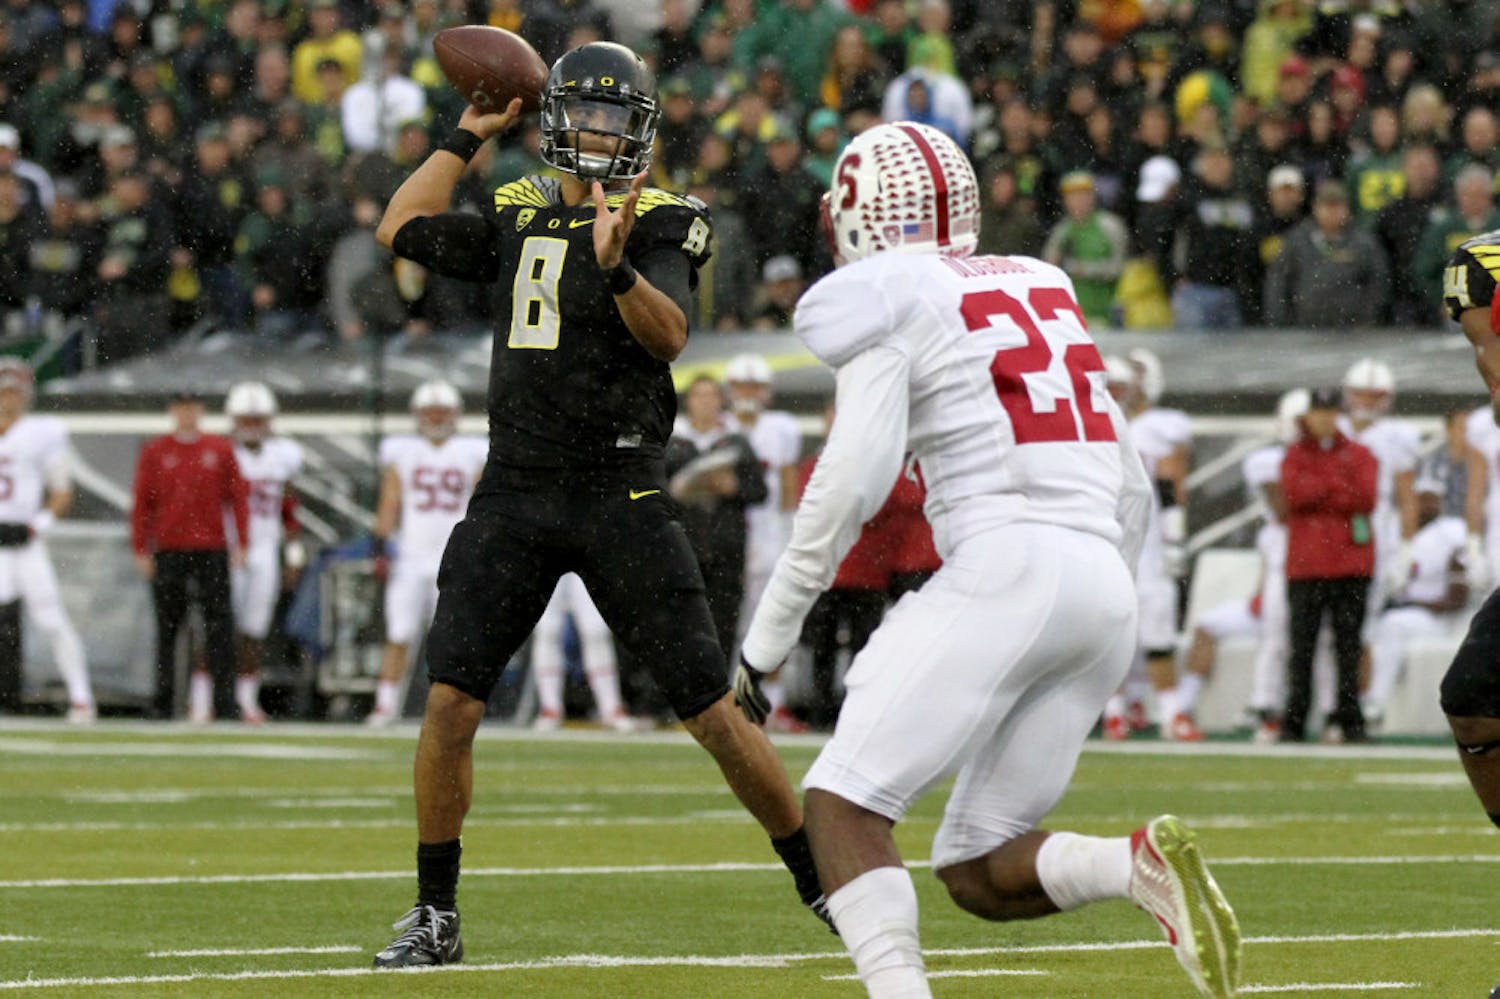 Oregon quarterback Marcus Mariota (8) looks to throw towards the end zone during the first quarter against Stanford in an NCAA college football game in Eugene, Ore., Saturday, Nov. 1, 2014.&nbsp;